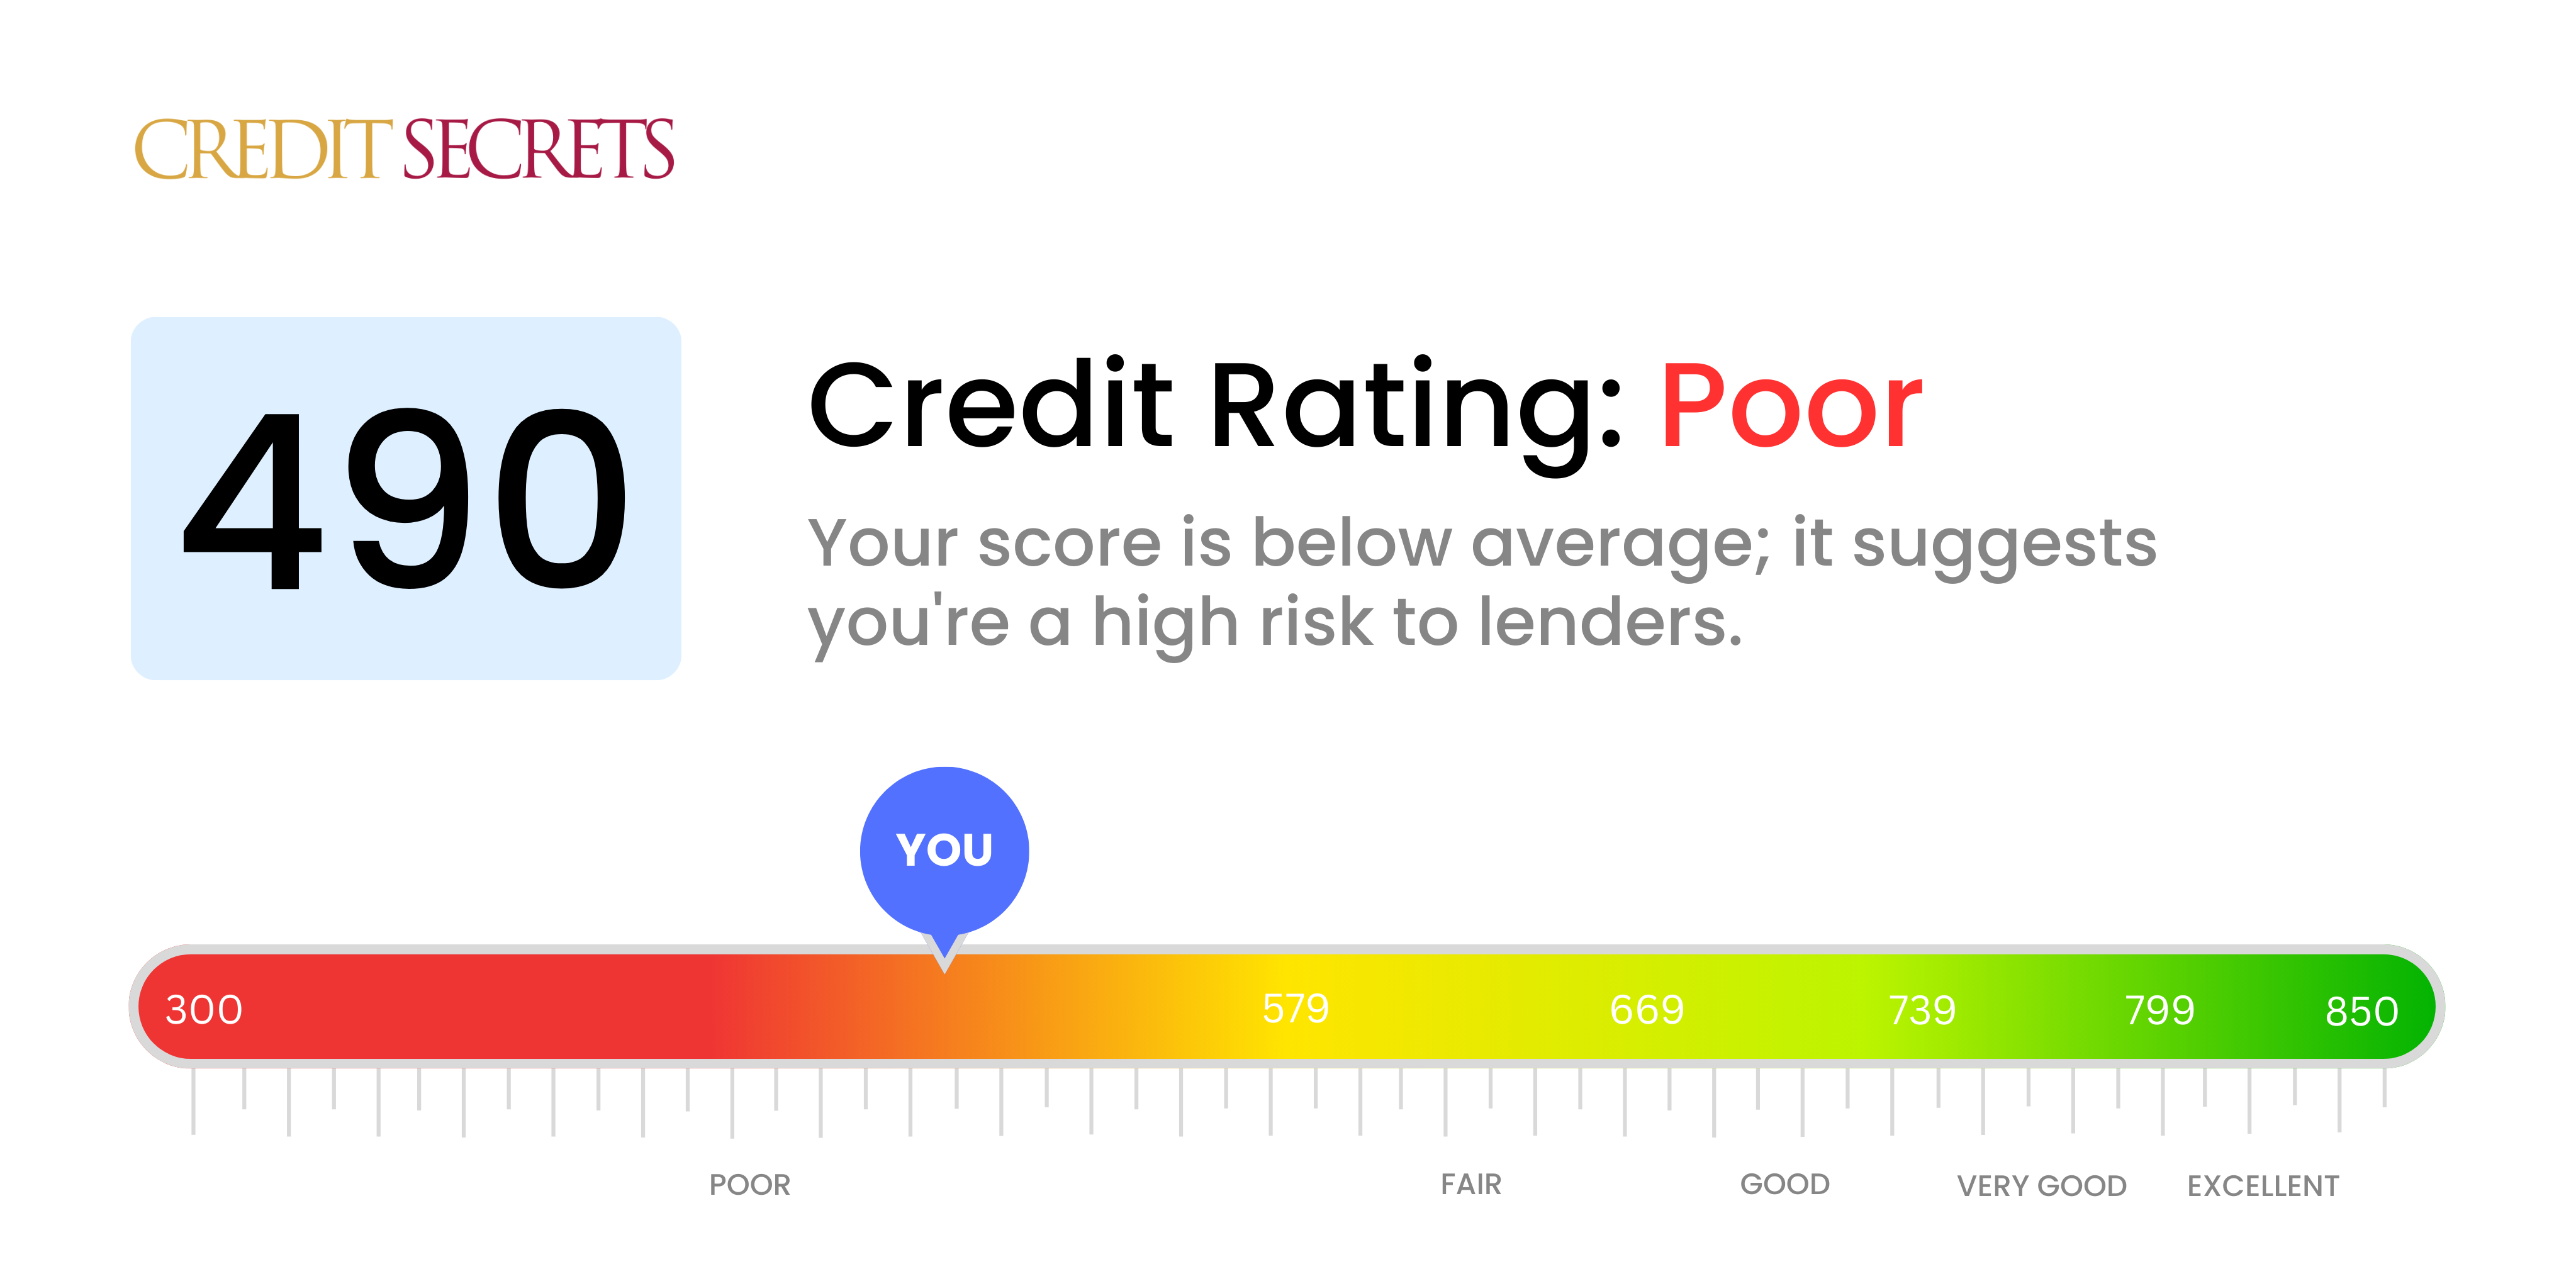 Is 490 a good credit score?